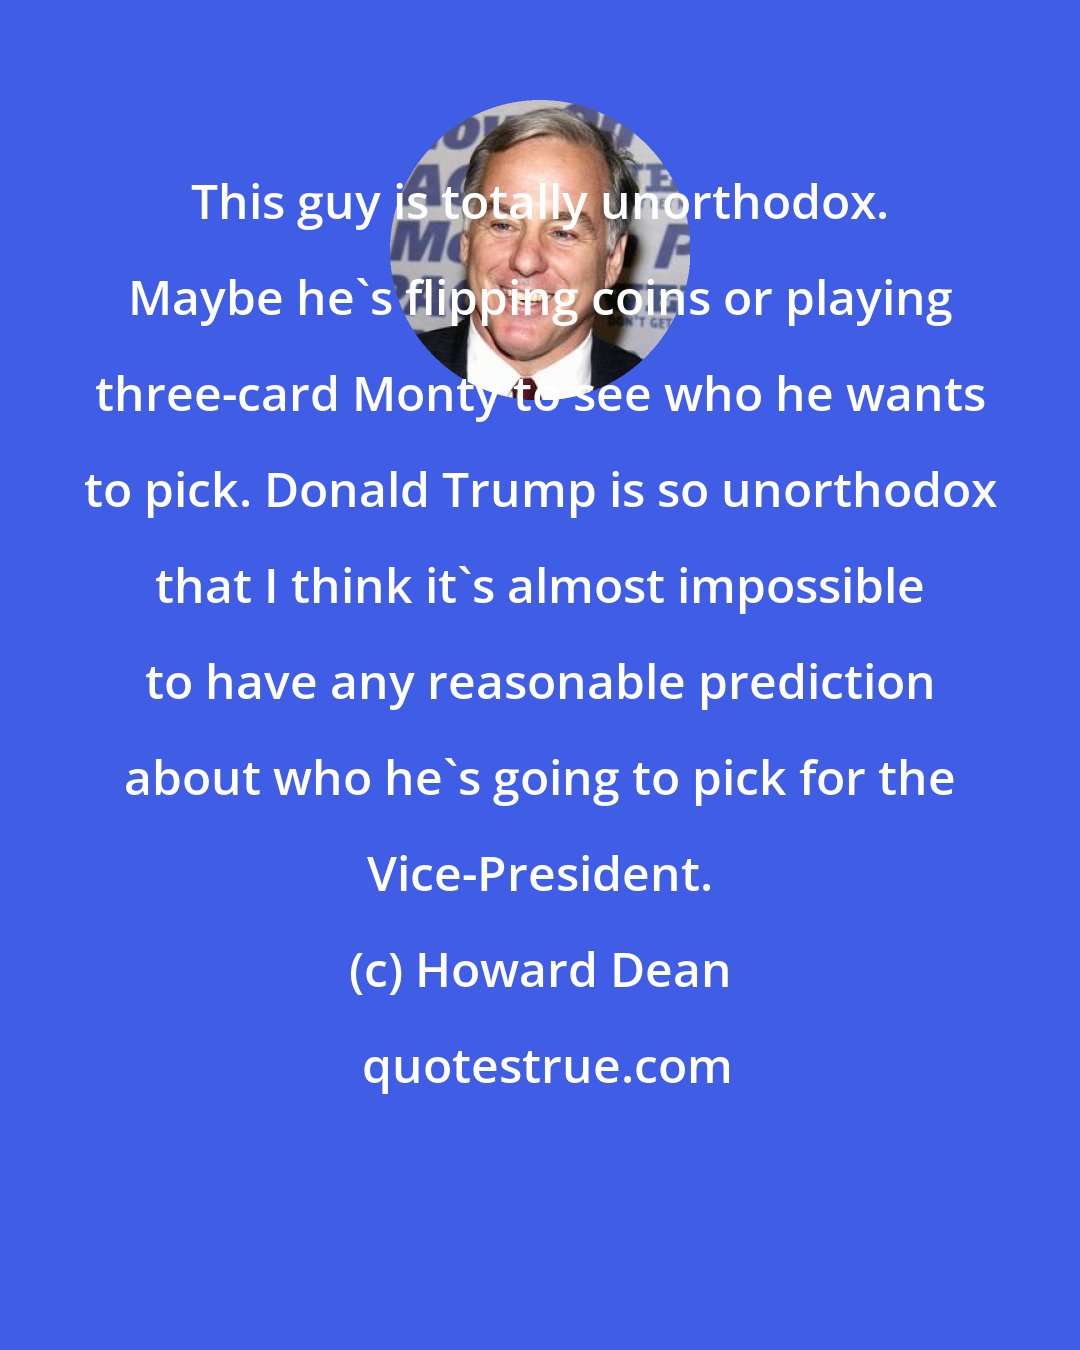 Howard Dean: This guy is totally unorthodox. Maybe he`s flipping coins or playing three-card Monty to see who he wants to pick. Donald Trump is so unorthodox that I think it`s almost impossible to have any reasonable prediction about who he`s going to pick for the Vice-President.